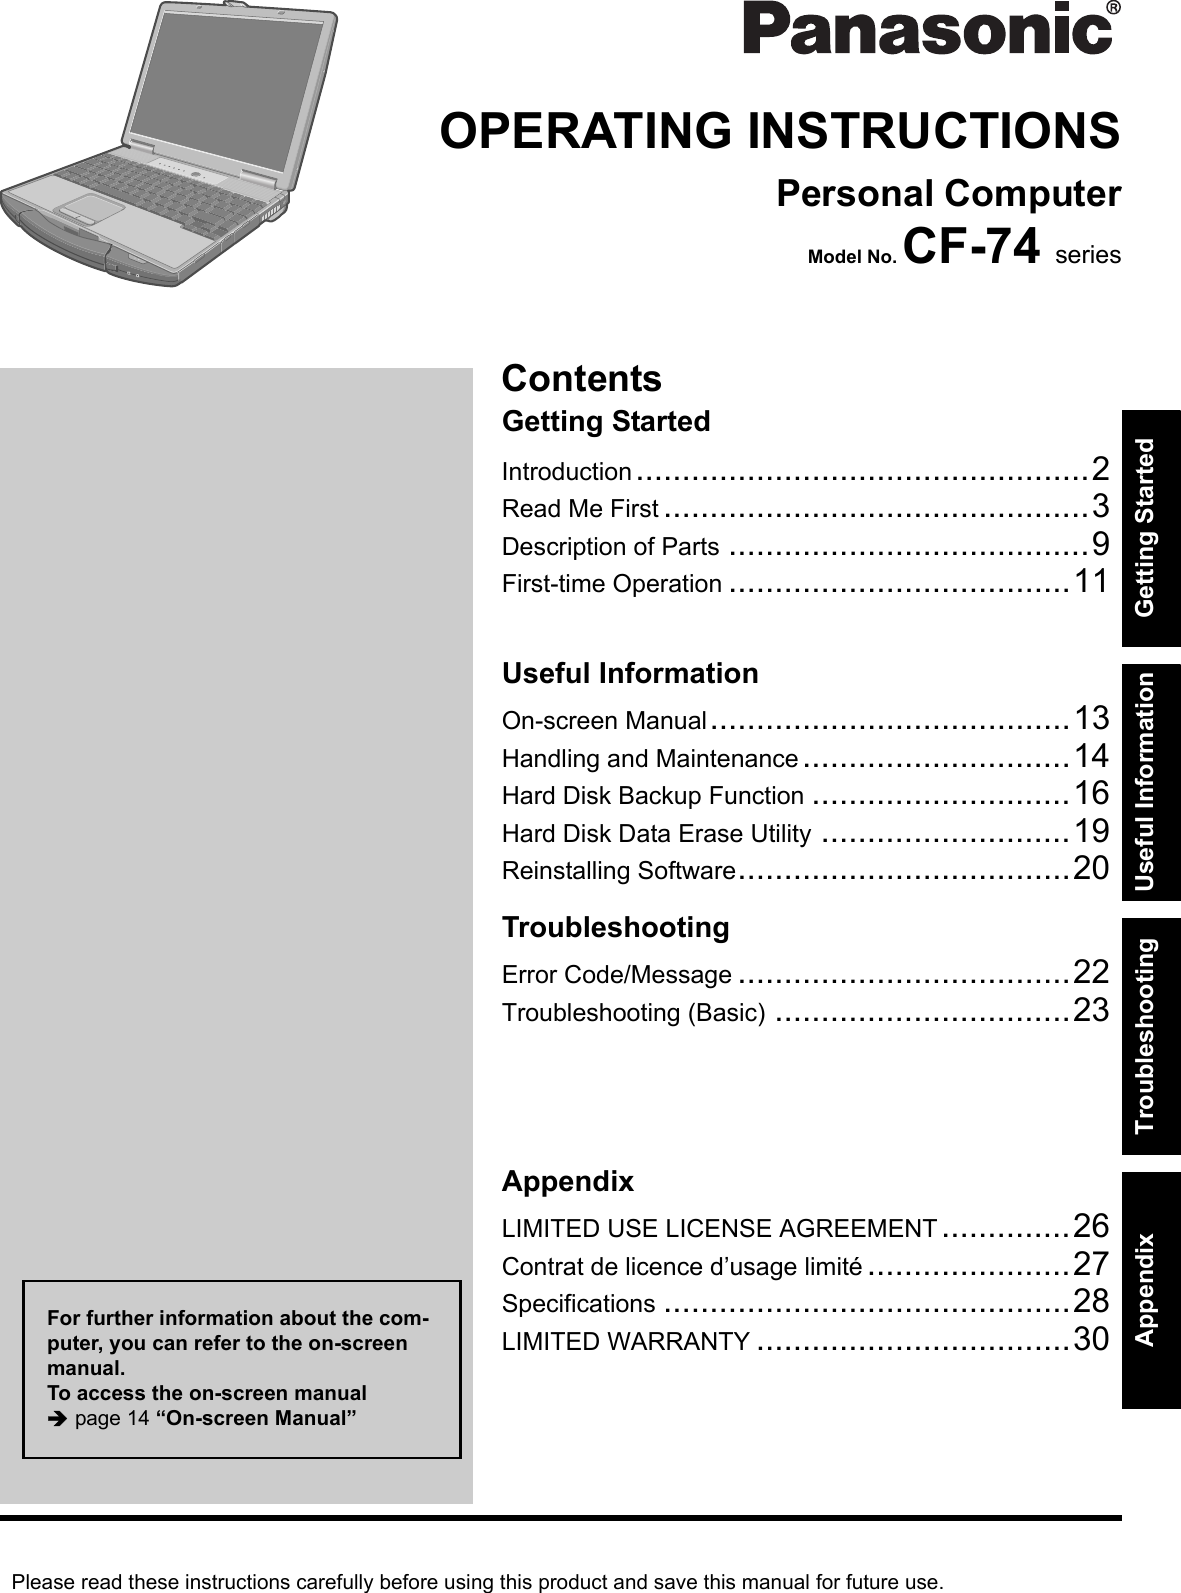 Please read these instructions carefully before using this product and save this manual for future use.ContentsGetting StartedUseful InformationTroubleshootingGetting StartedUseful InformationTroubleshootingAppendixAppendixOPERATING INSTRUCTIONSPersonal ComputerModel No. CF-74 seriesIntroduction.................................................2Read Me First ..............................................3Description of Parts .......................................9First-time Operation .....................................11On-screen Manual.......................................13Handling and Maintenance.............................14Hard Disk Backup Function ............................16Hard Disk Data Erase Utility ...........................19Reinstalling Software....................................20Error Code/Message ....................................22Troubleshooting (Basic) ................................23LIMITED USE LICENSE AGREEMENT..............26Contrat de licence d’usage limité ......................27Specifications ............................................28LIMITED WARRANTY ..................................30For further information about the com-puter, you can refer to the on-screen manual.To access the on-screen manual page 14 “On-screen Manual”